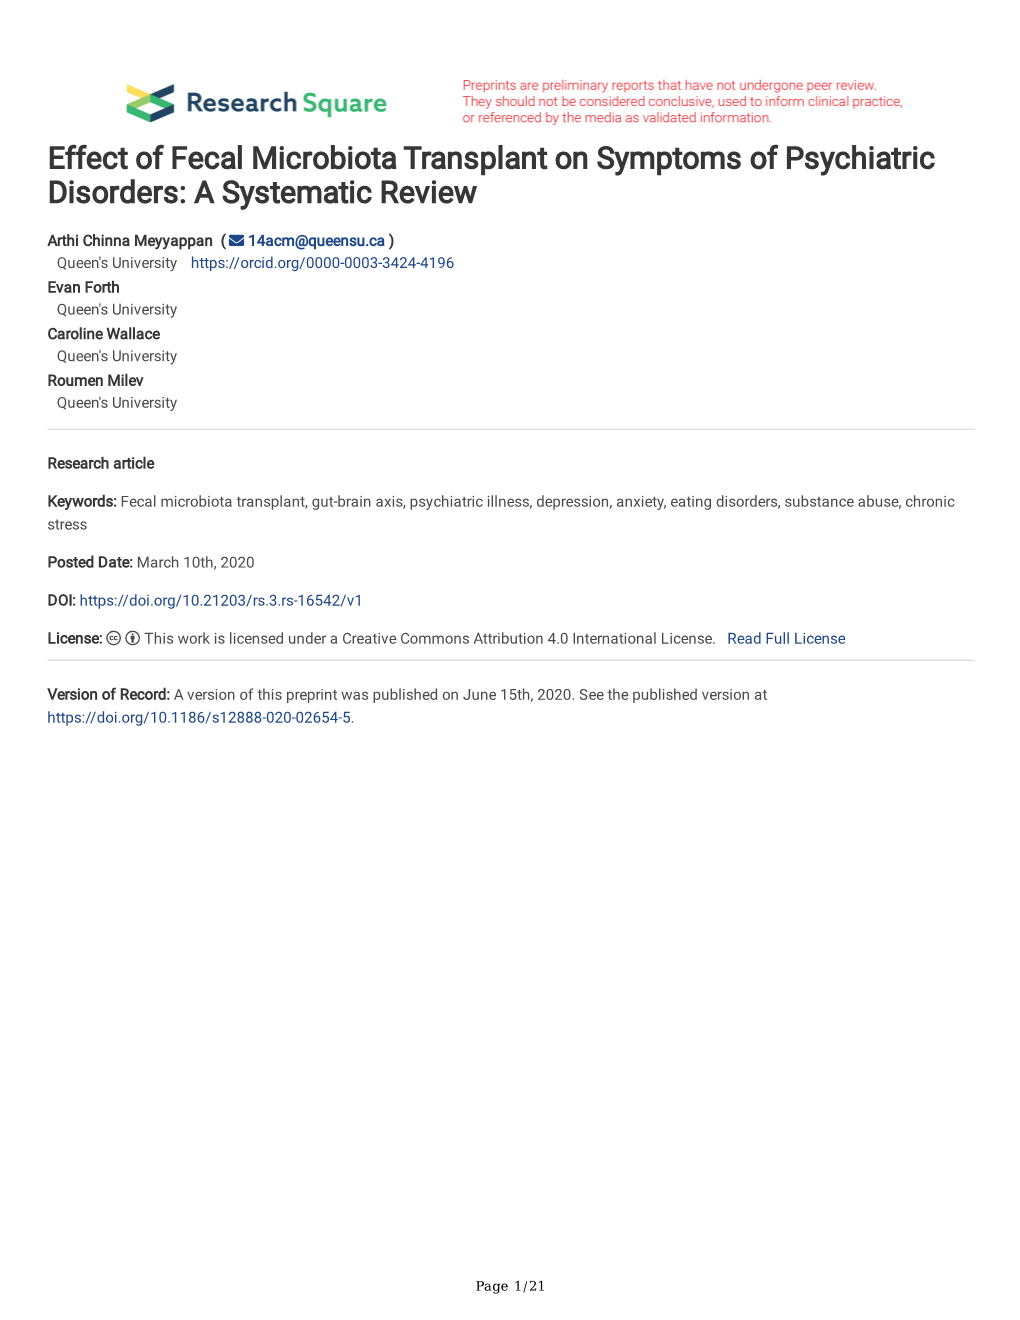 Effect of Fecal Microbiota Transplant on Symptoms of Psychiatric Disorders: a Systematic Review